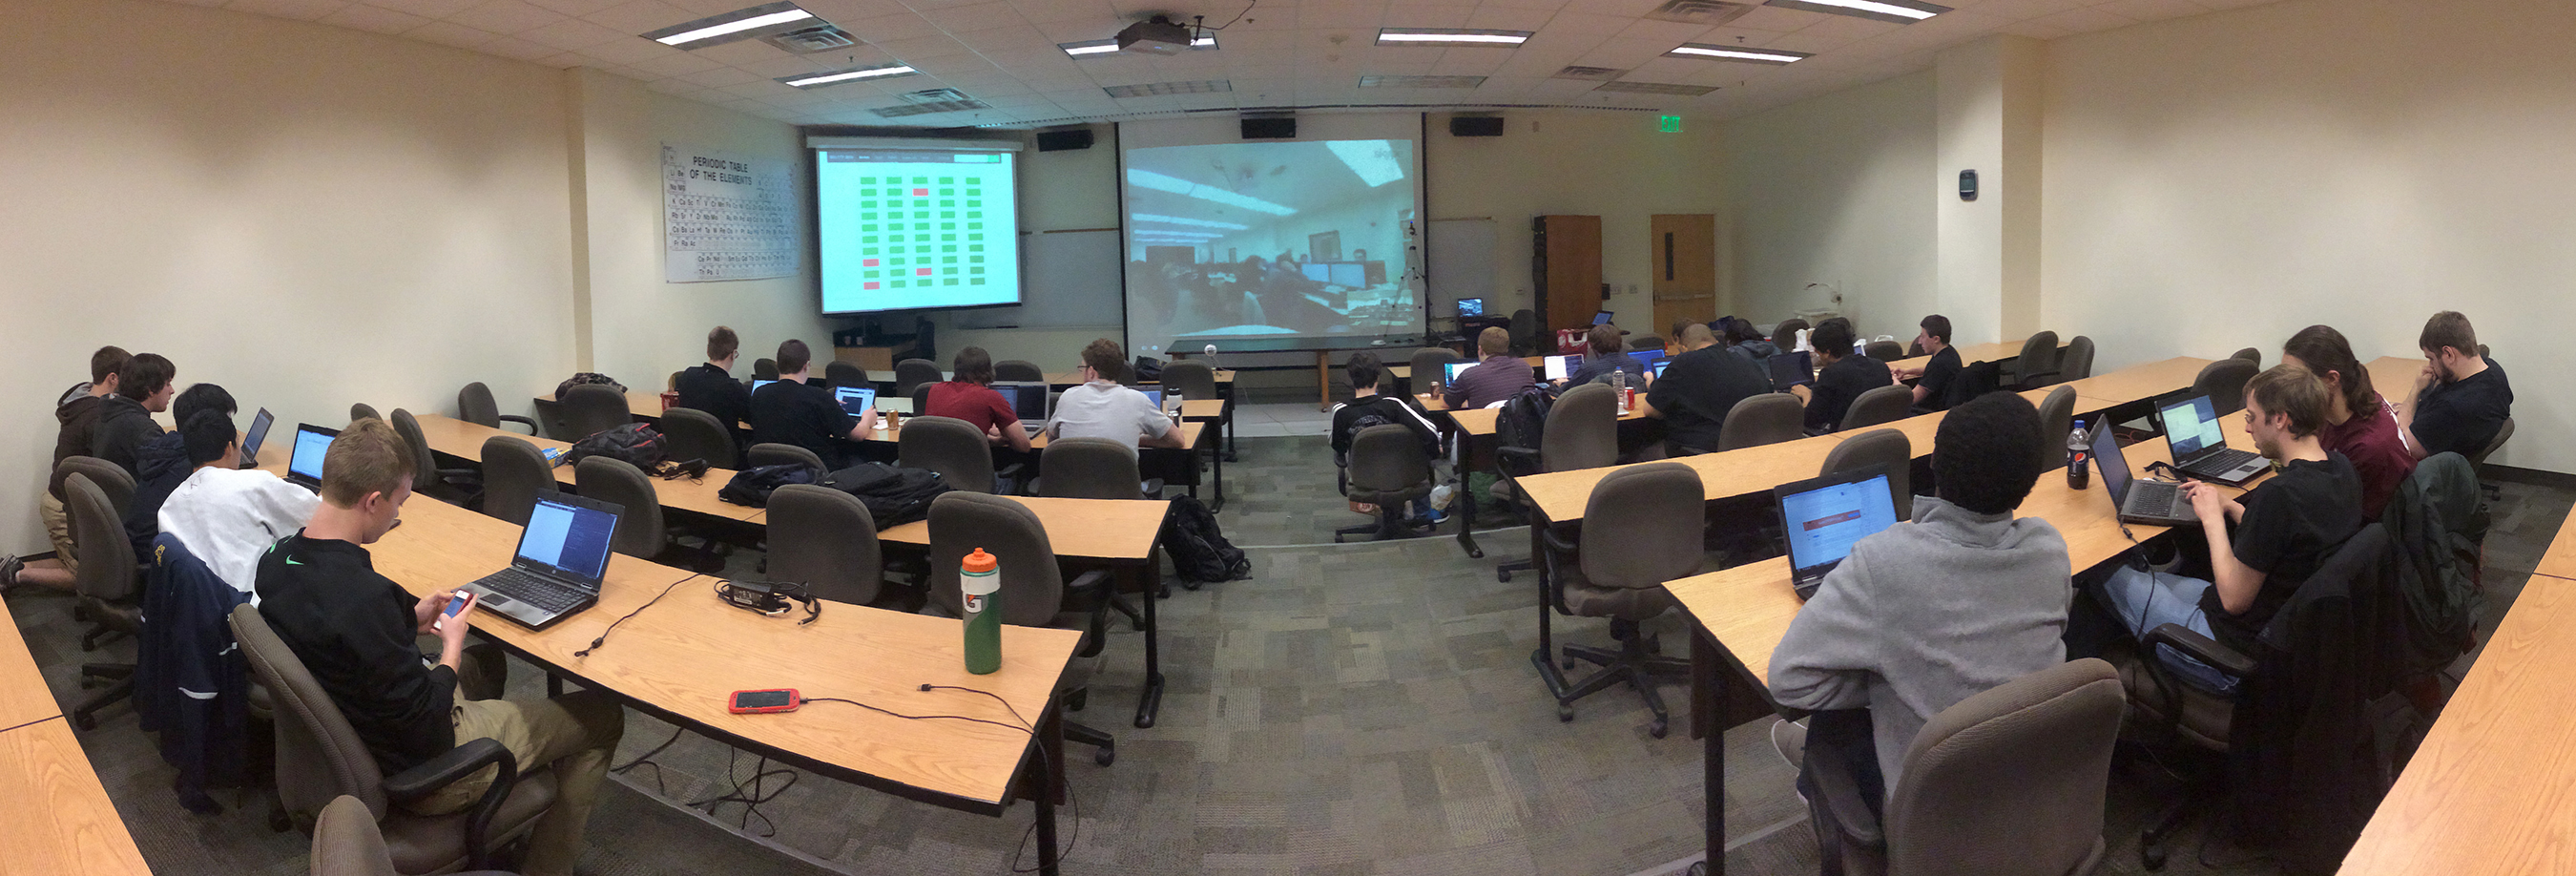 Panoramic view of the hacking competition at Buena Vista University and the screen displaying the web camera feed from Whitworth University